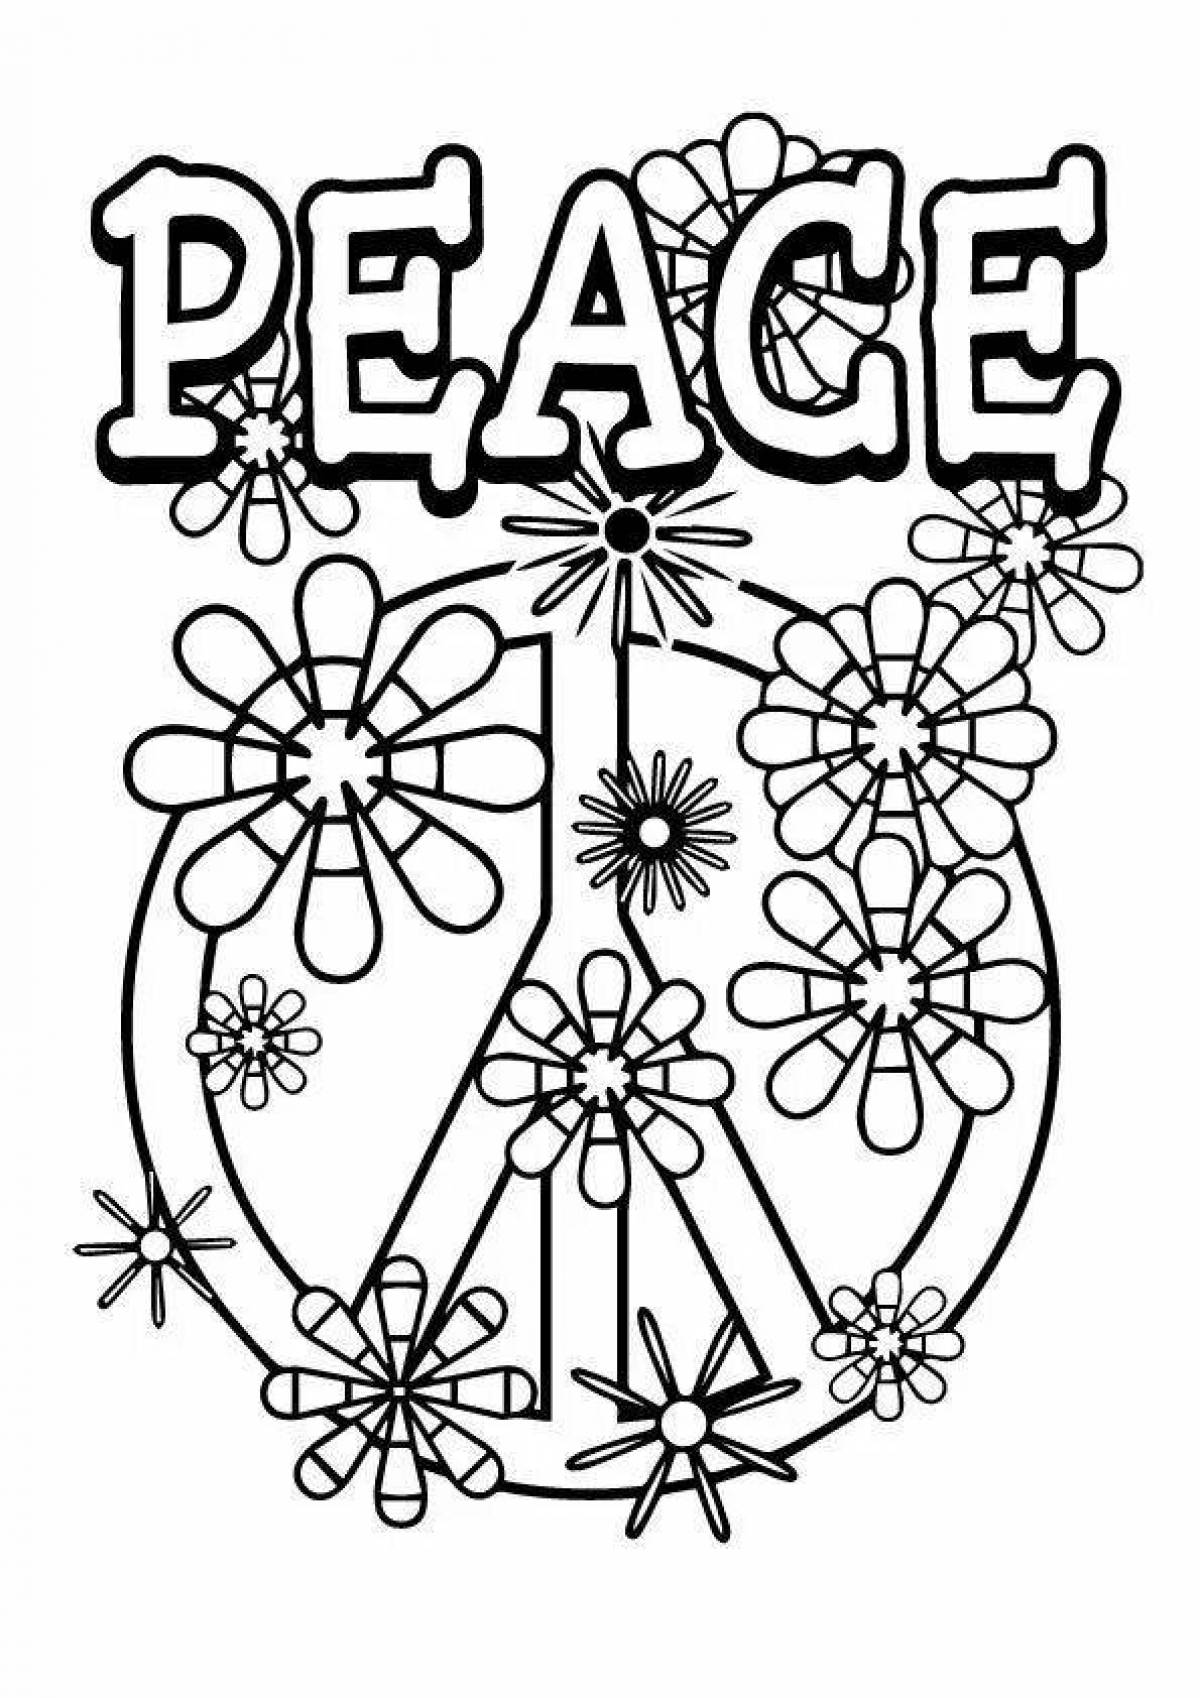 Hippie coloring page bright